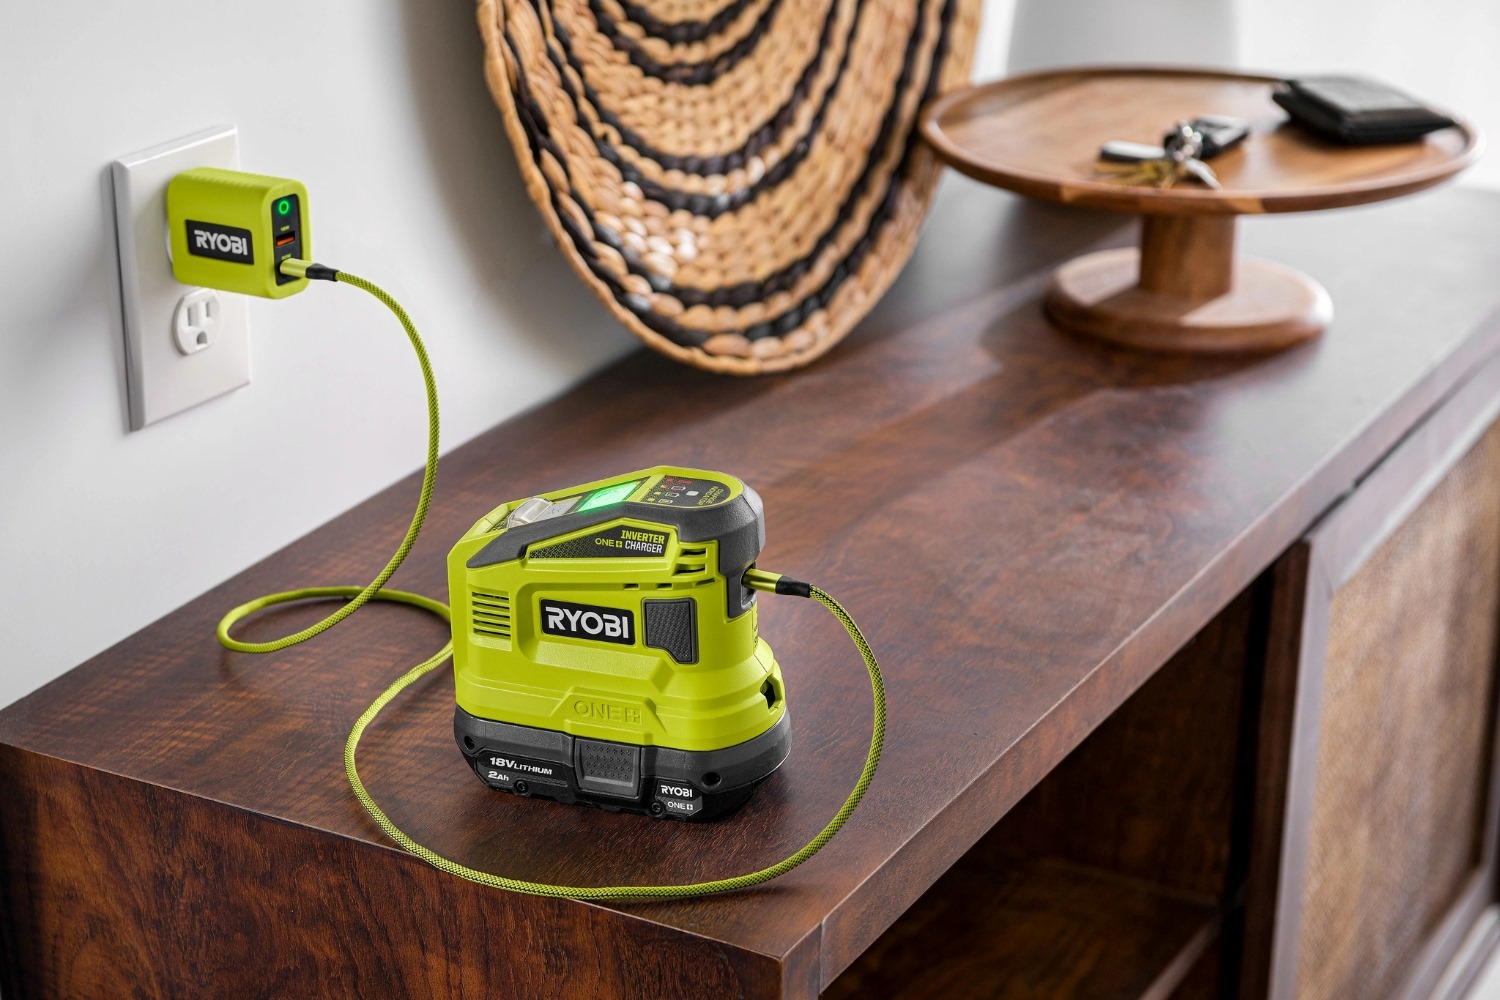 Ryobi Power Boost: Estimating Battery Charging Time